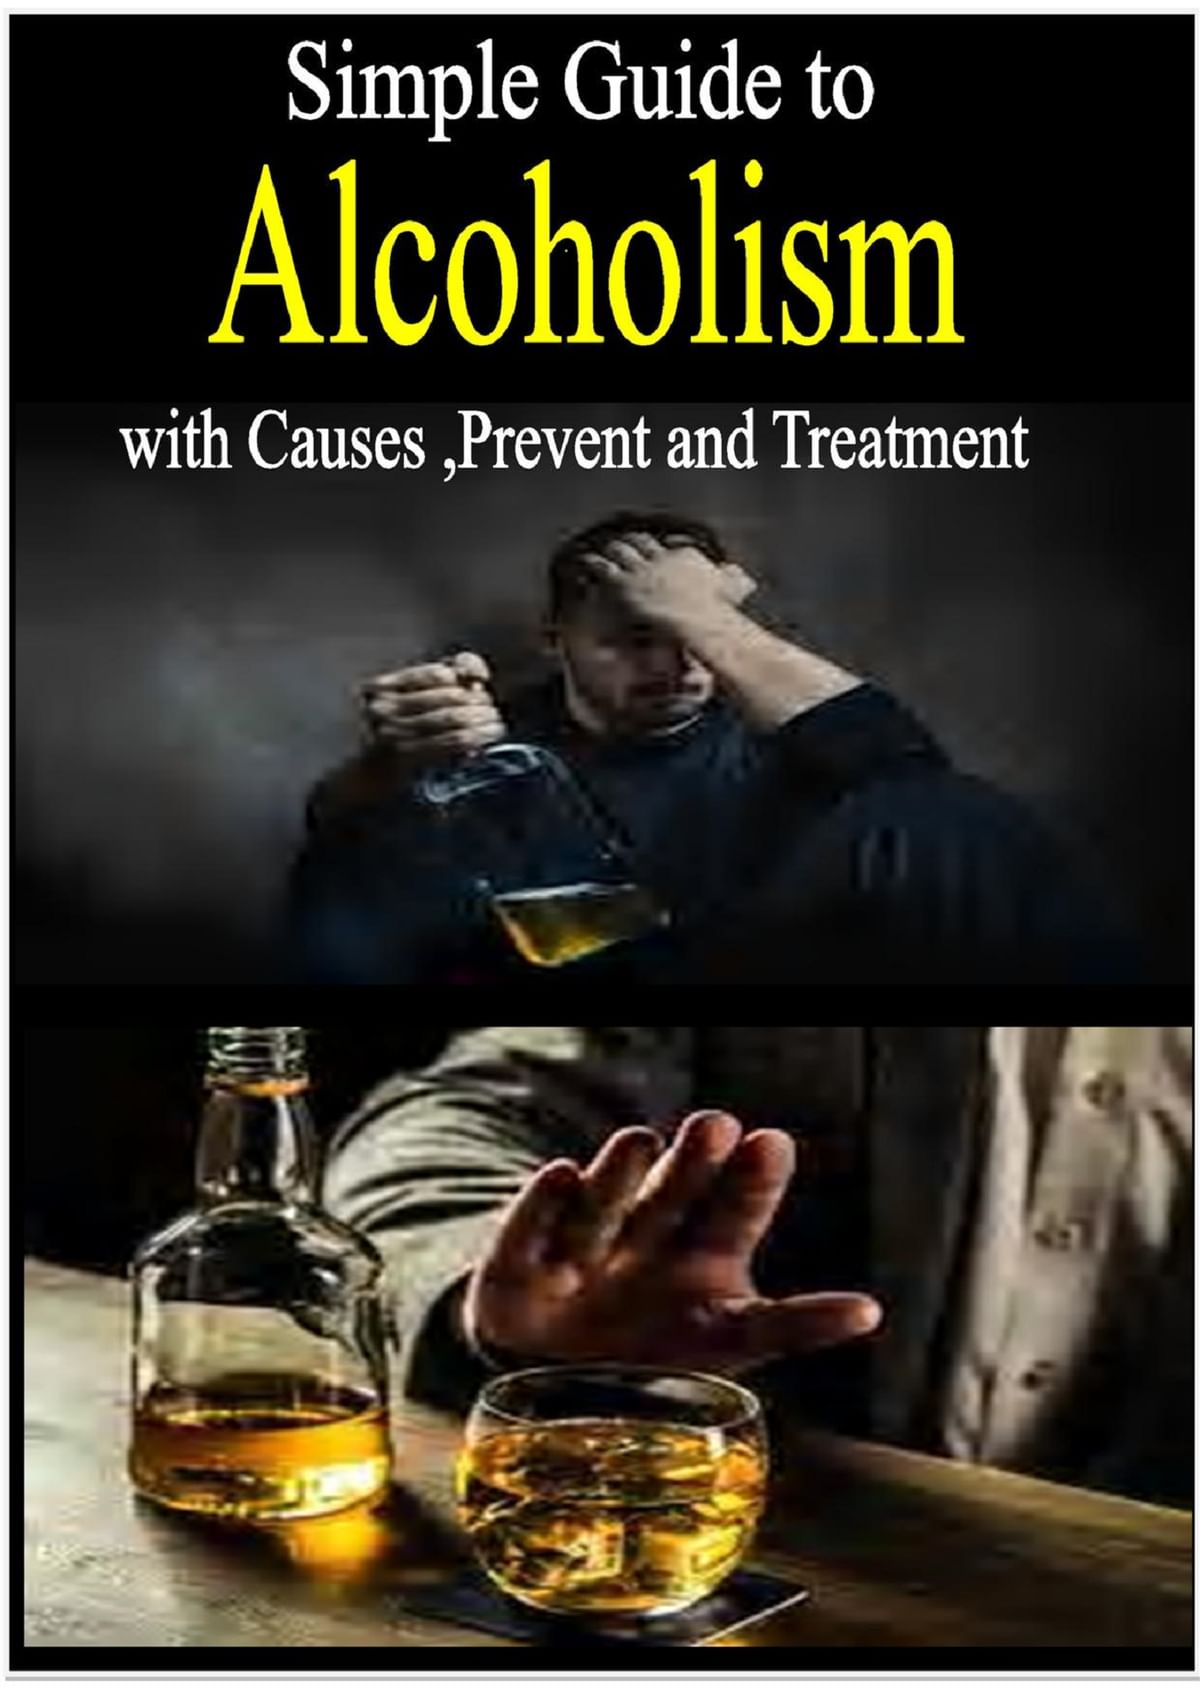 research topics related to alcoholism